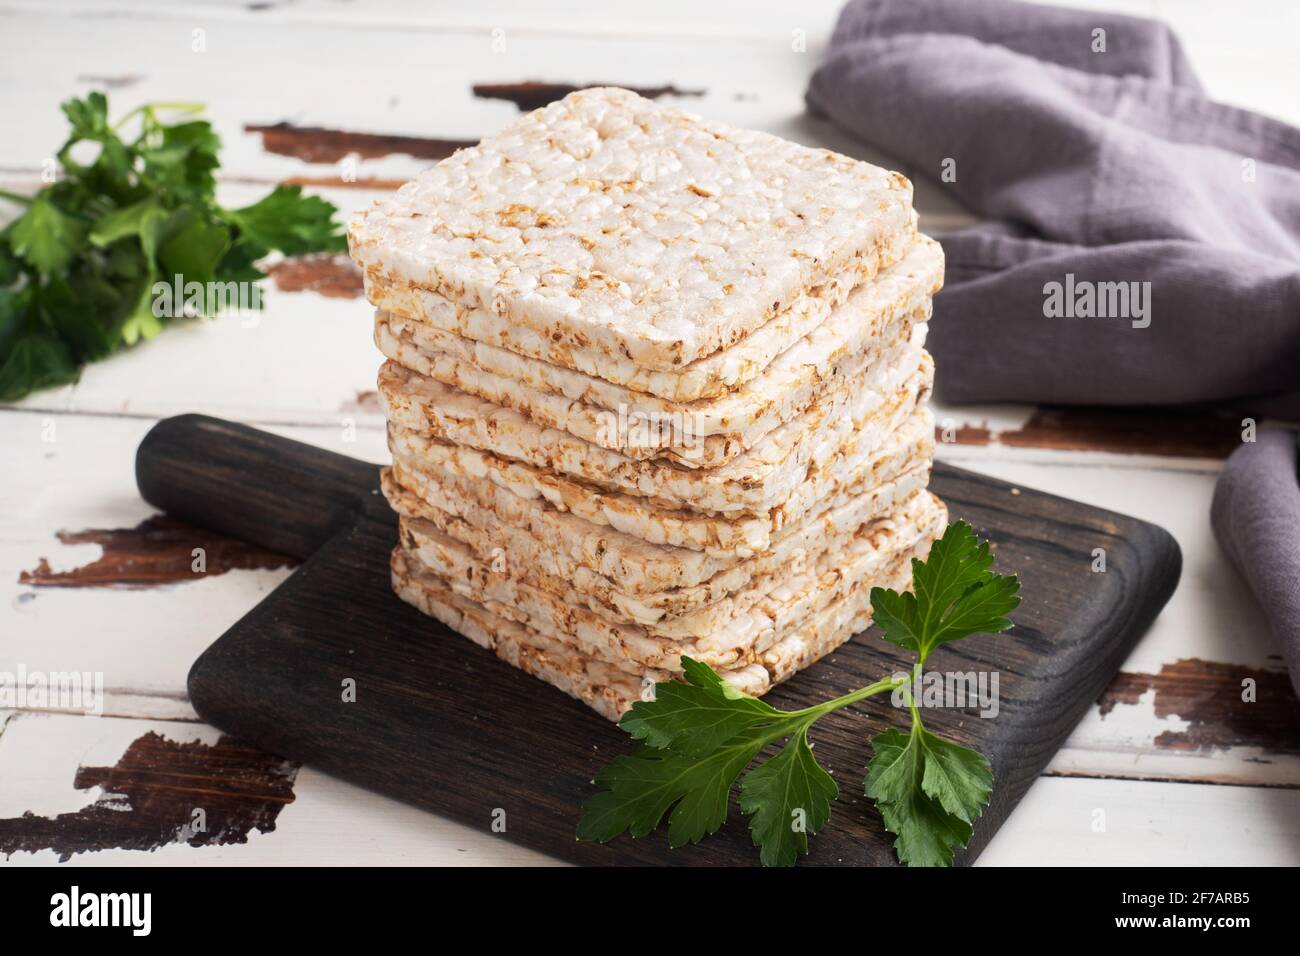 Healthy snack Crunchy crispbread with fresh parsley leaves. Wooden background, copy space Stock Photo